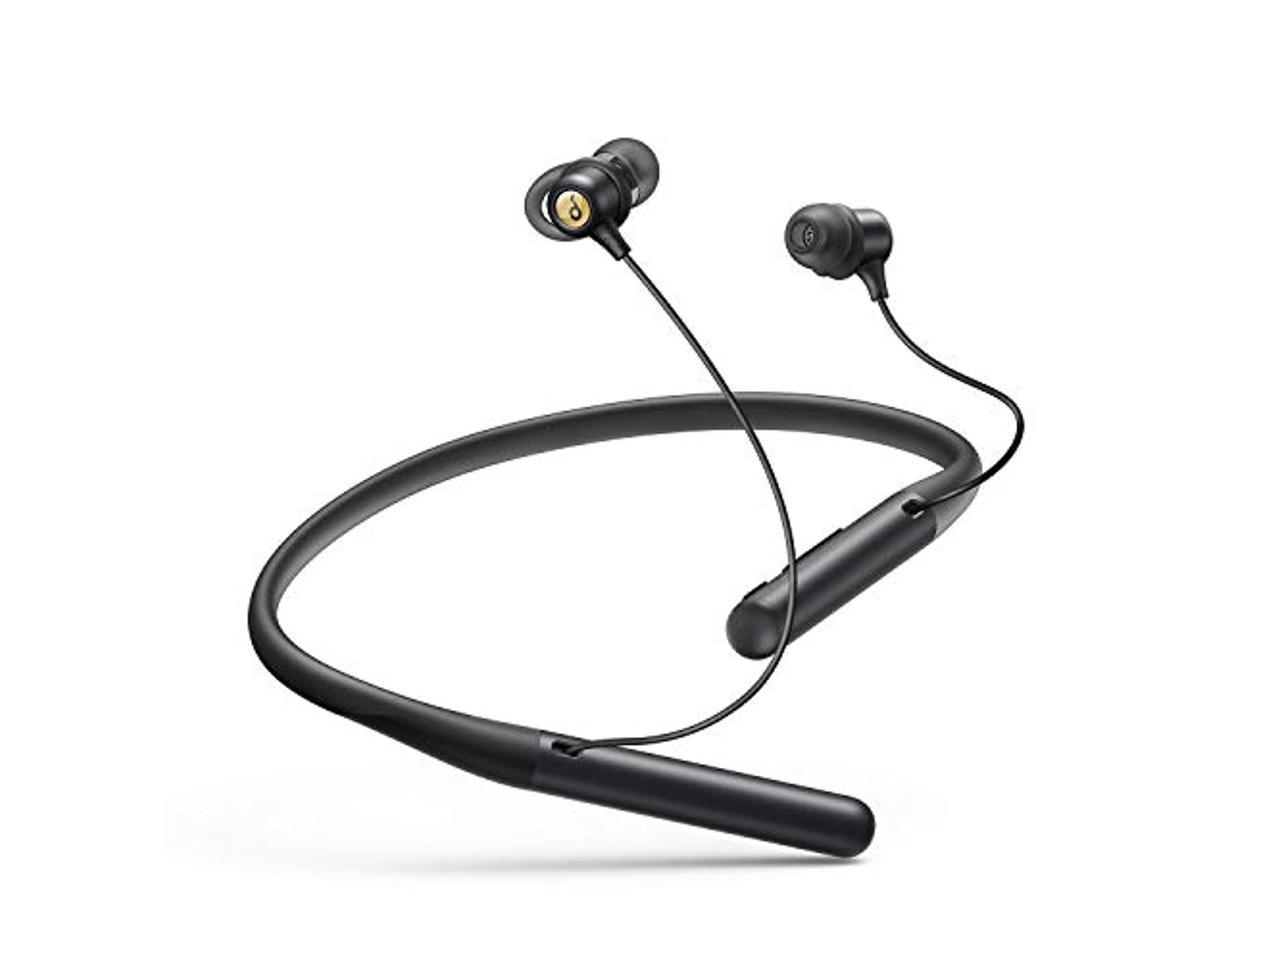 anker neckband bluetooth headphones and note 8